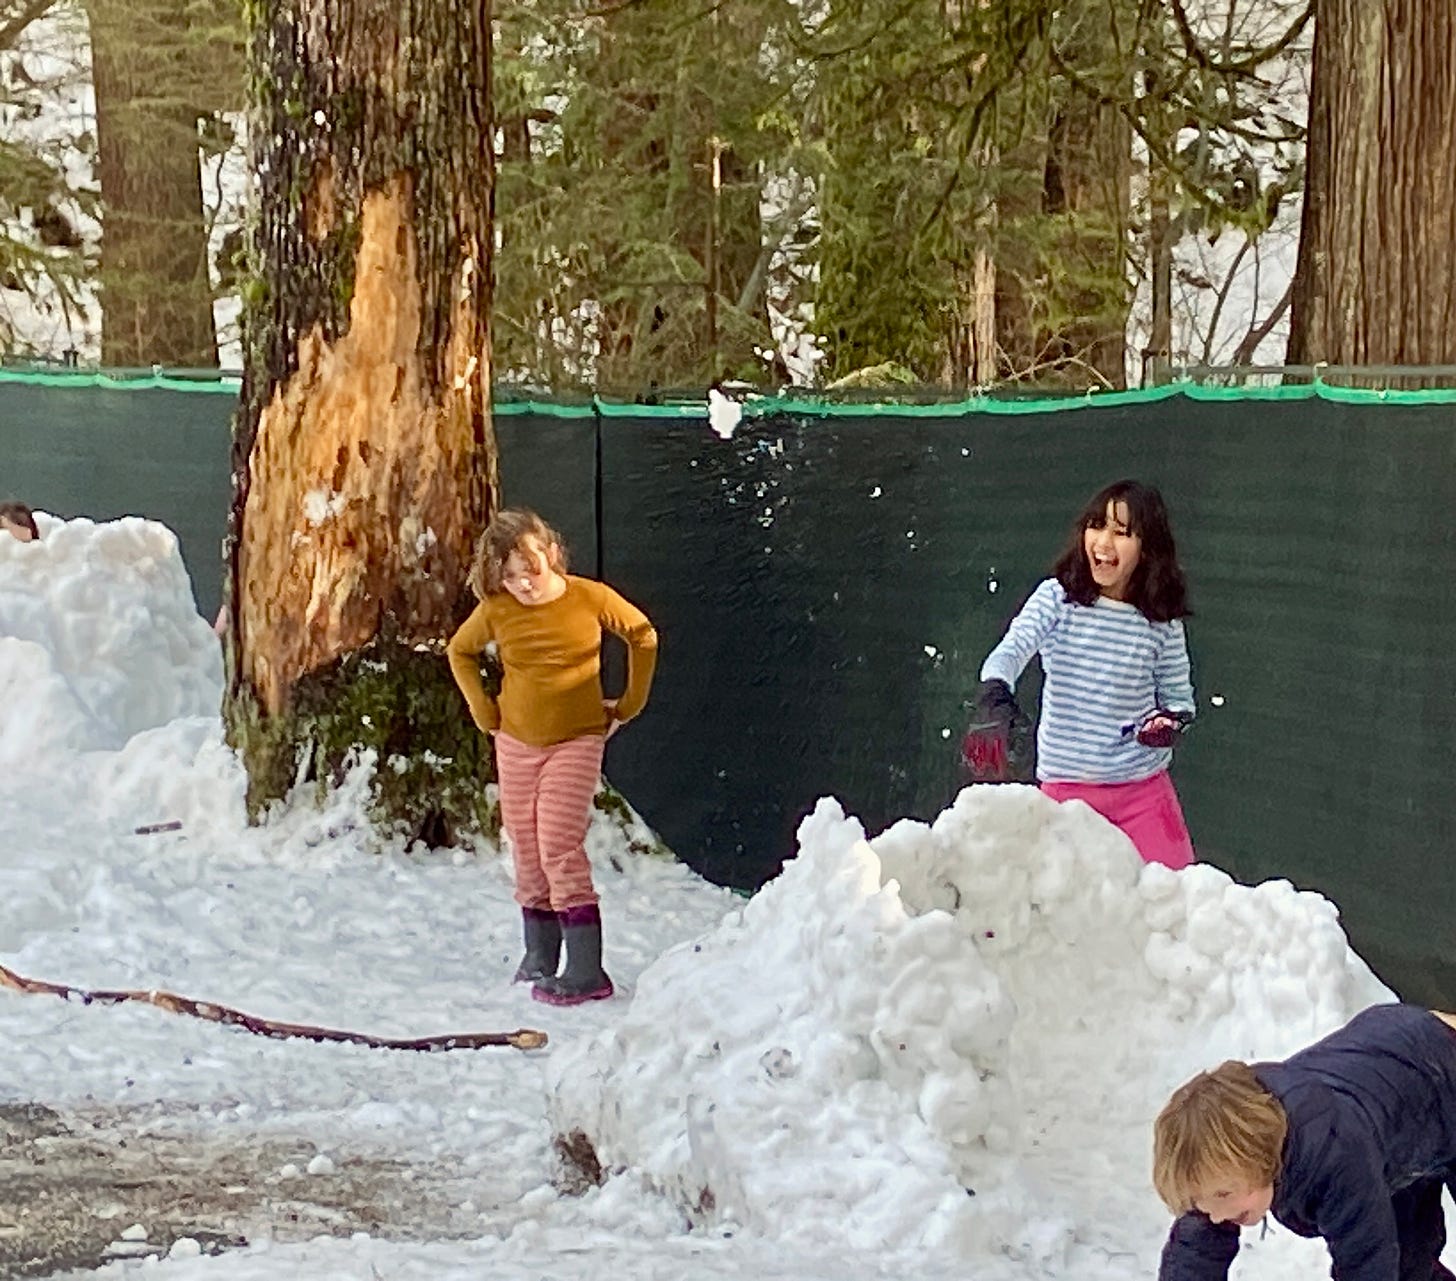 Three children playing in the snow, one girl is throwing a snowball